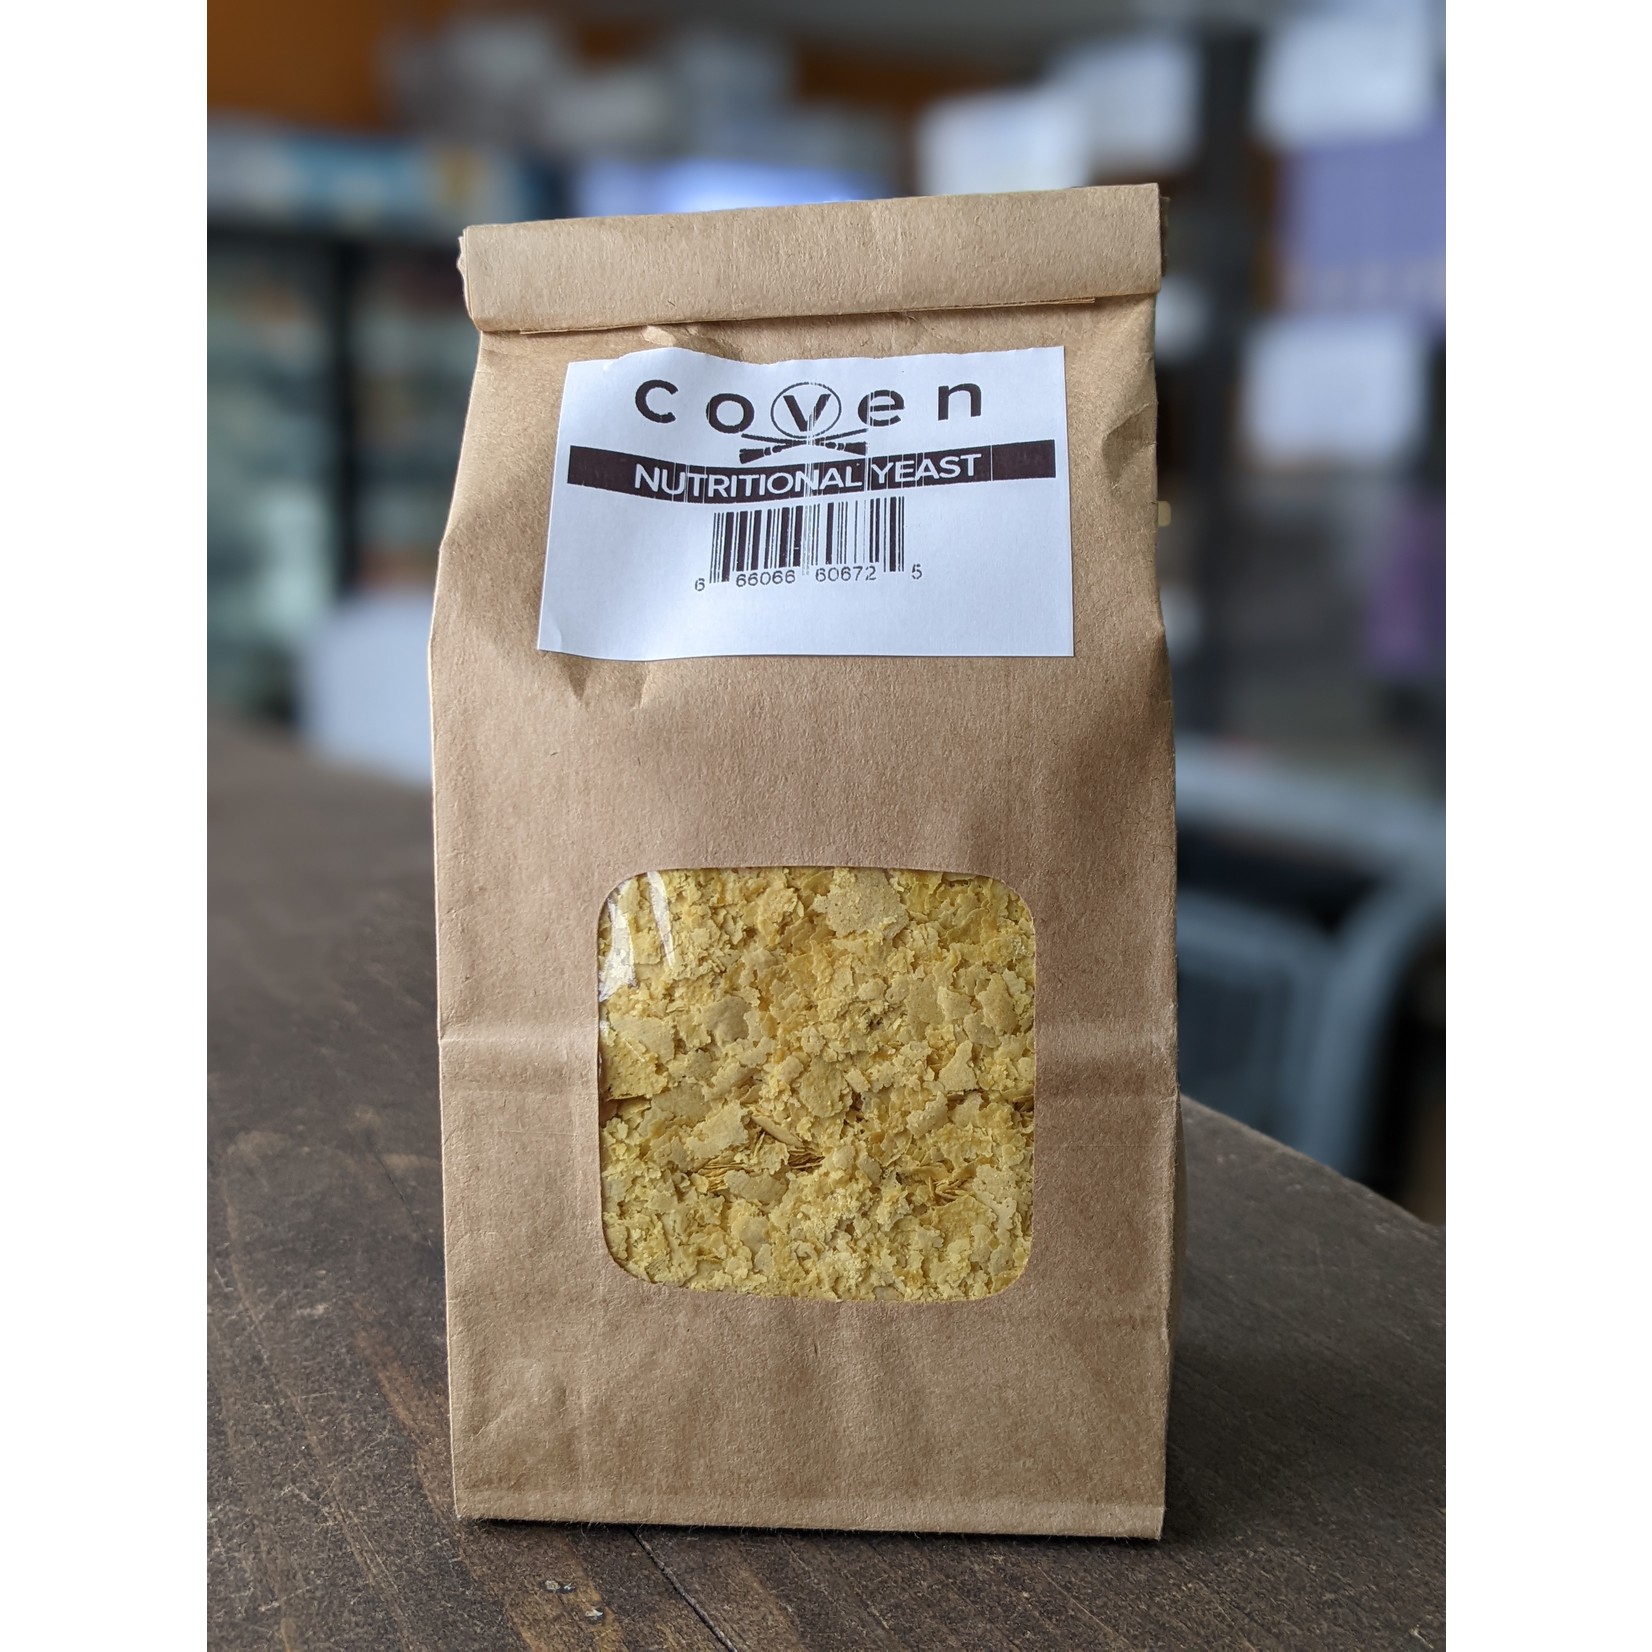 COVEN COVEN NUTRITIONAL YEAST - 150G PACKAGE